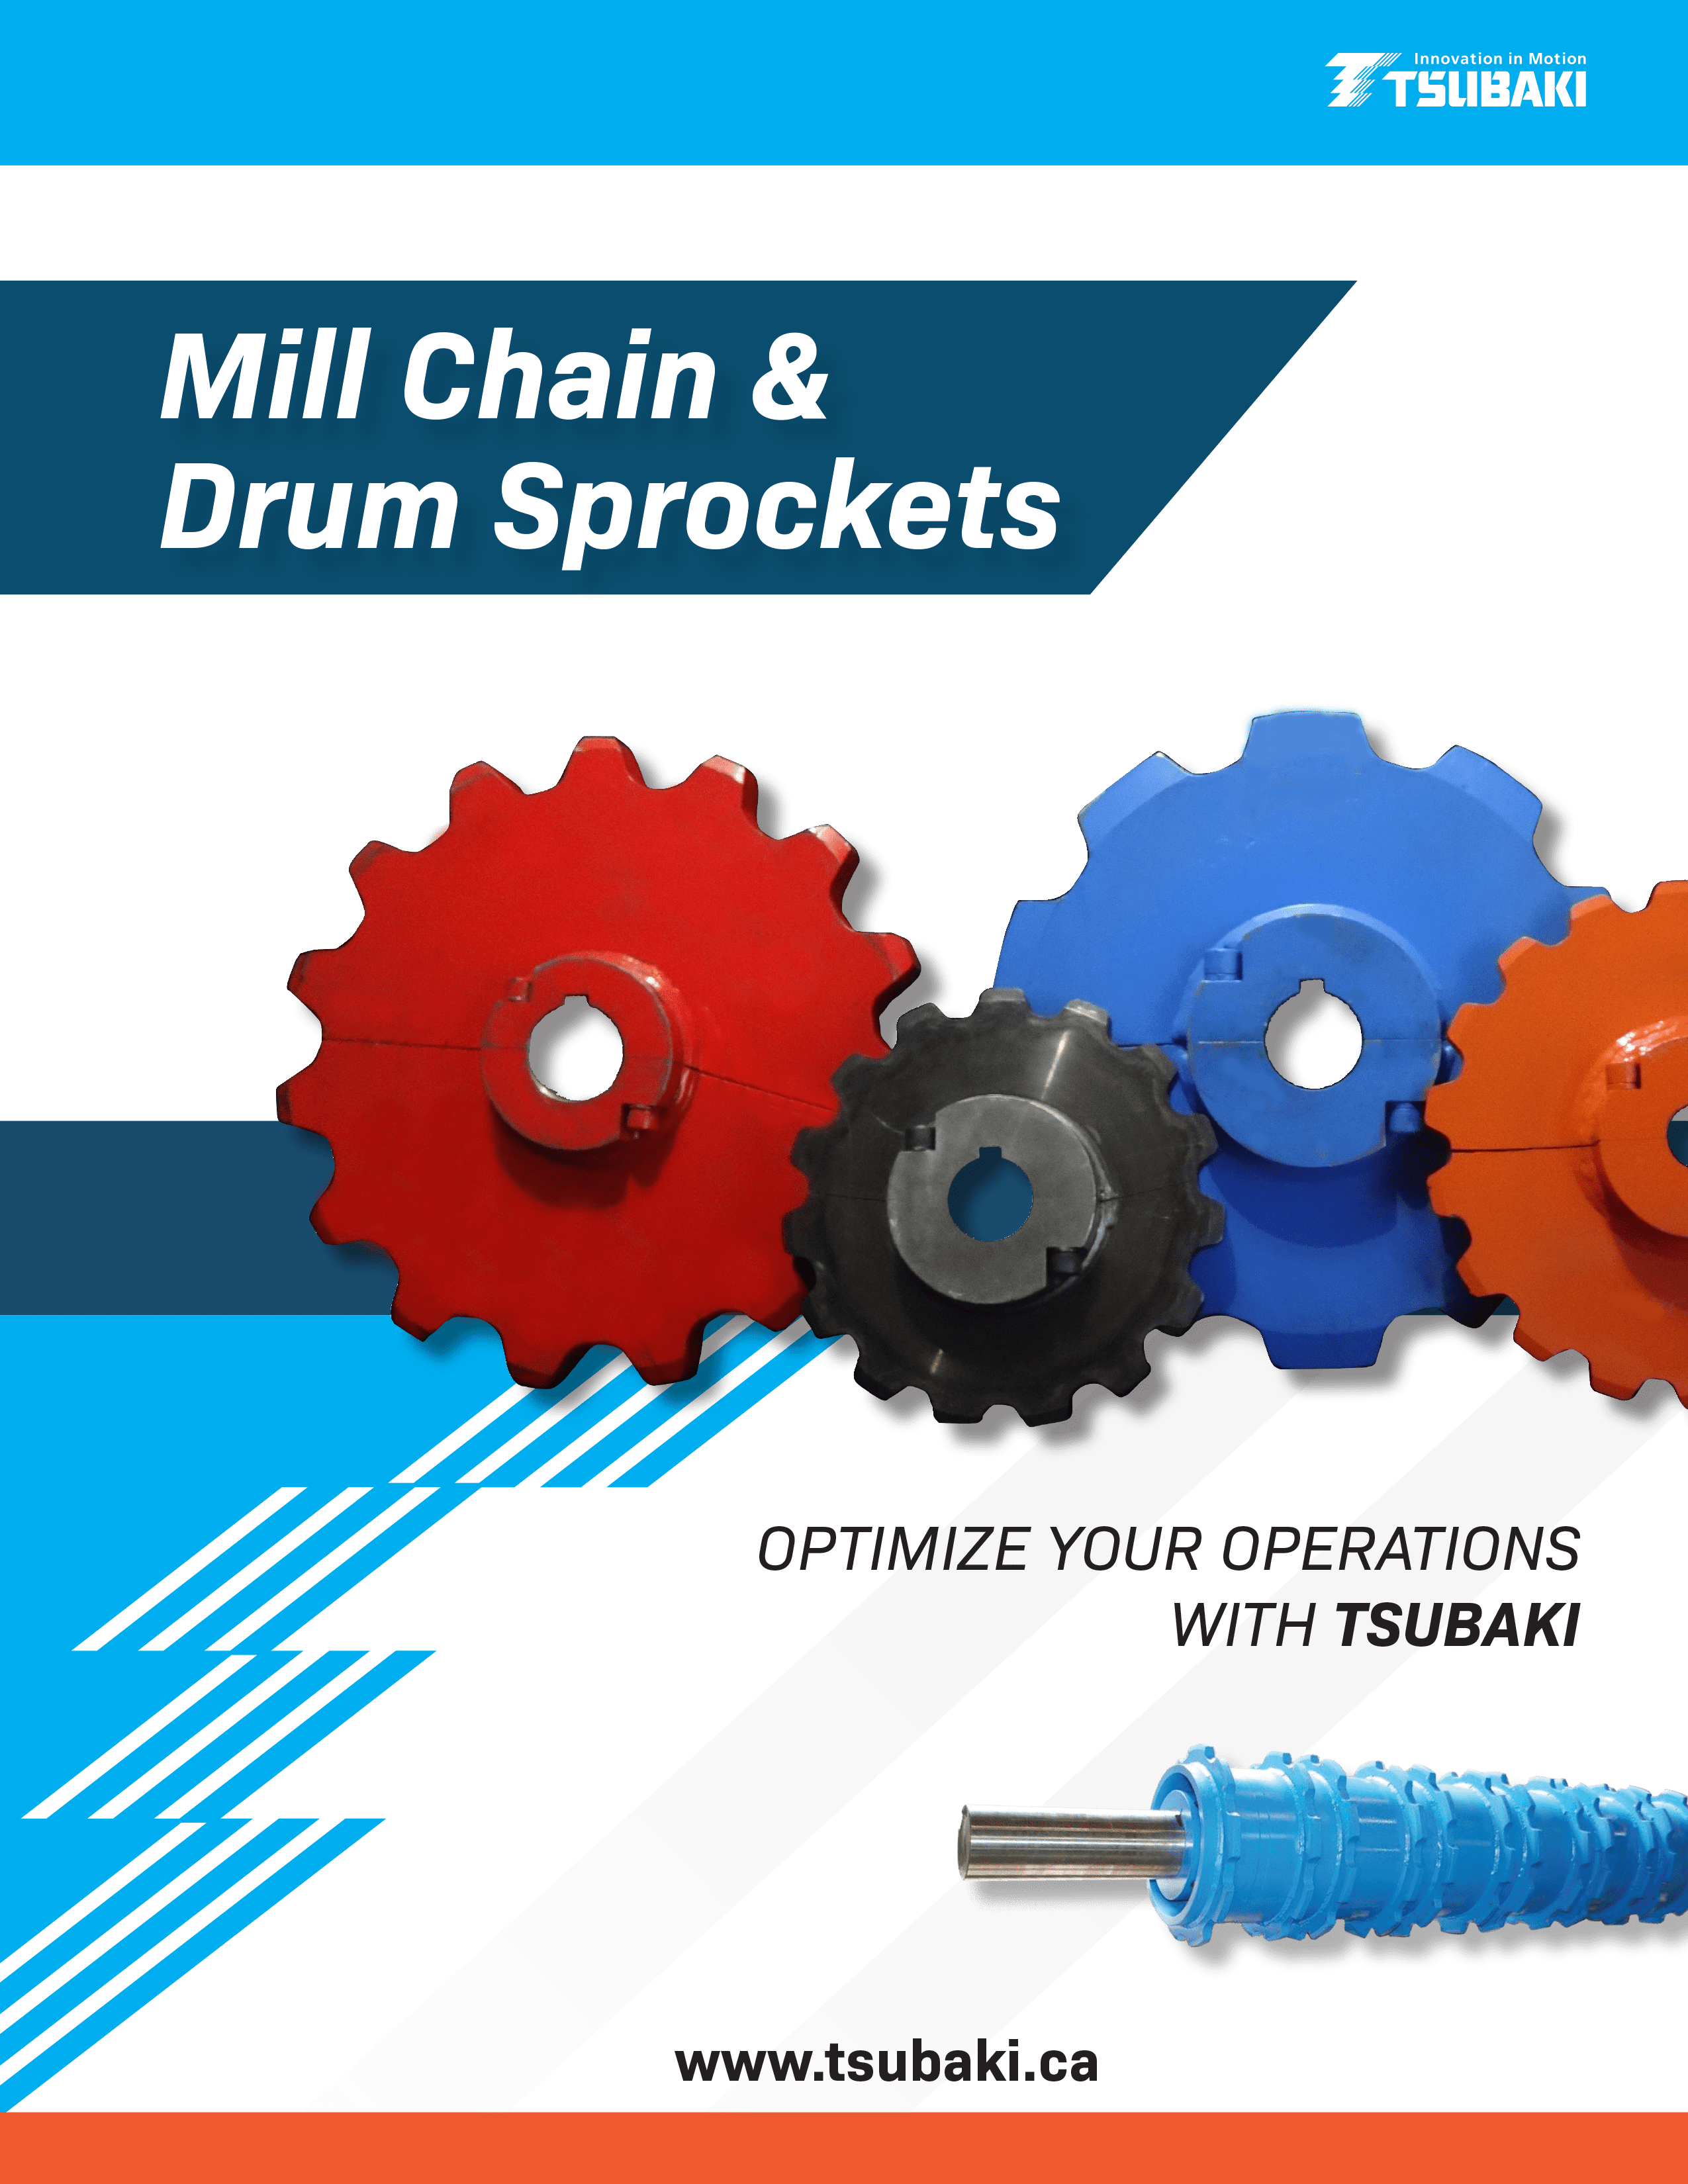 Mill Chain and Drum Sprockets